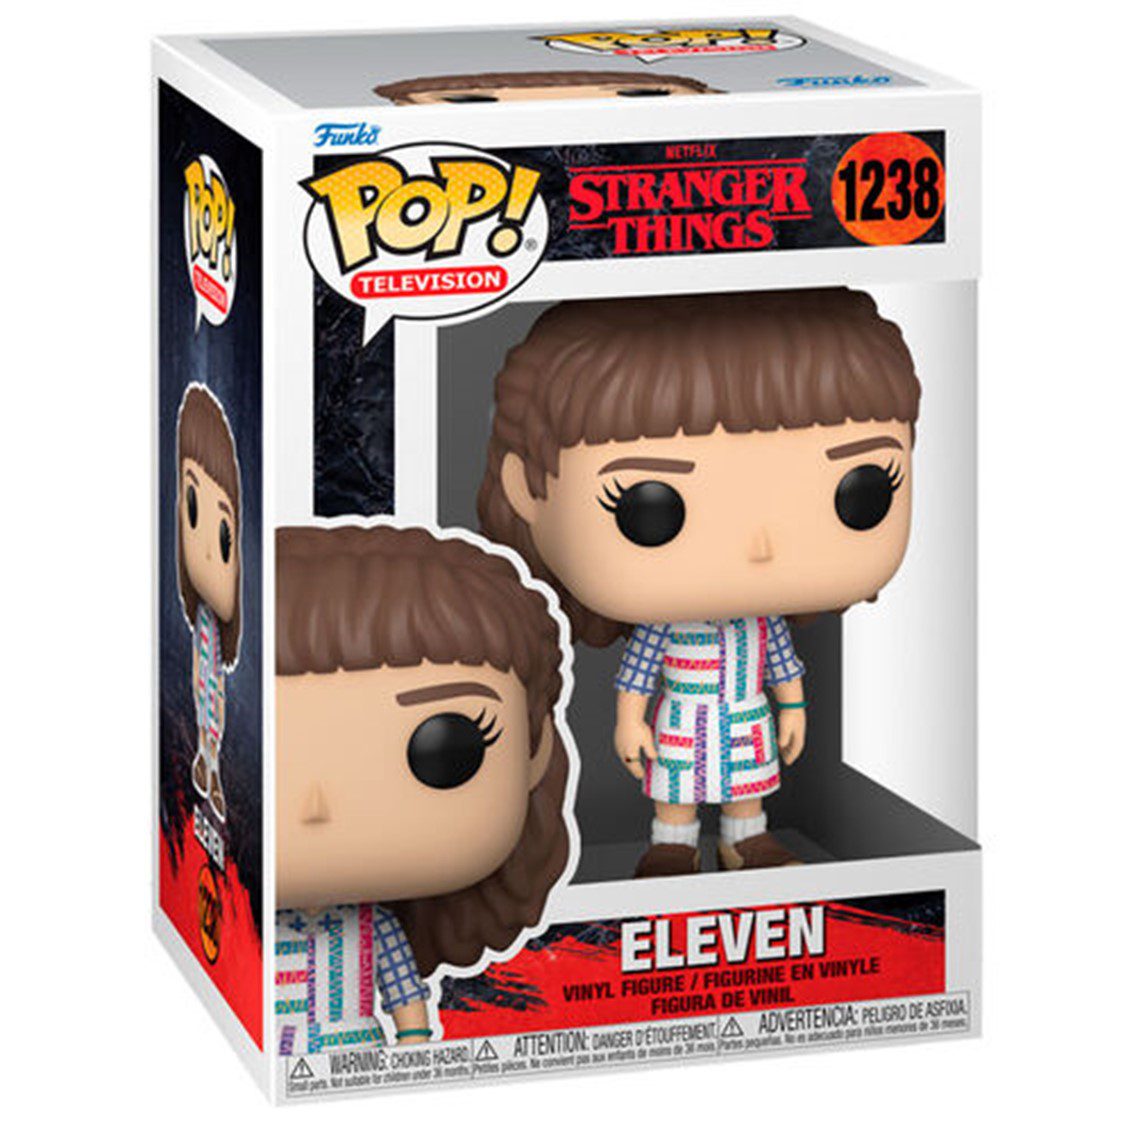 889698623889-PN-62388-Cod.-Articulo-MGS0000011811-Funko-pop-series-tv-stranger-things-s4-eleven-62388-2